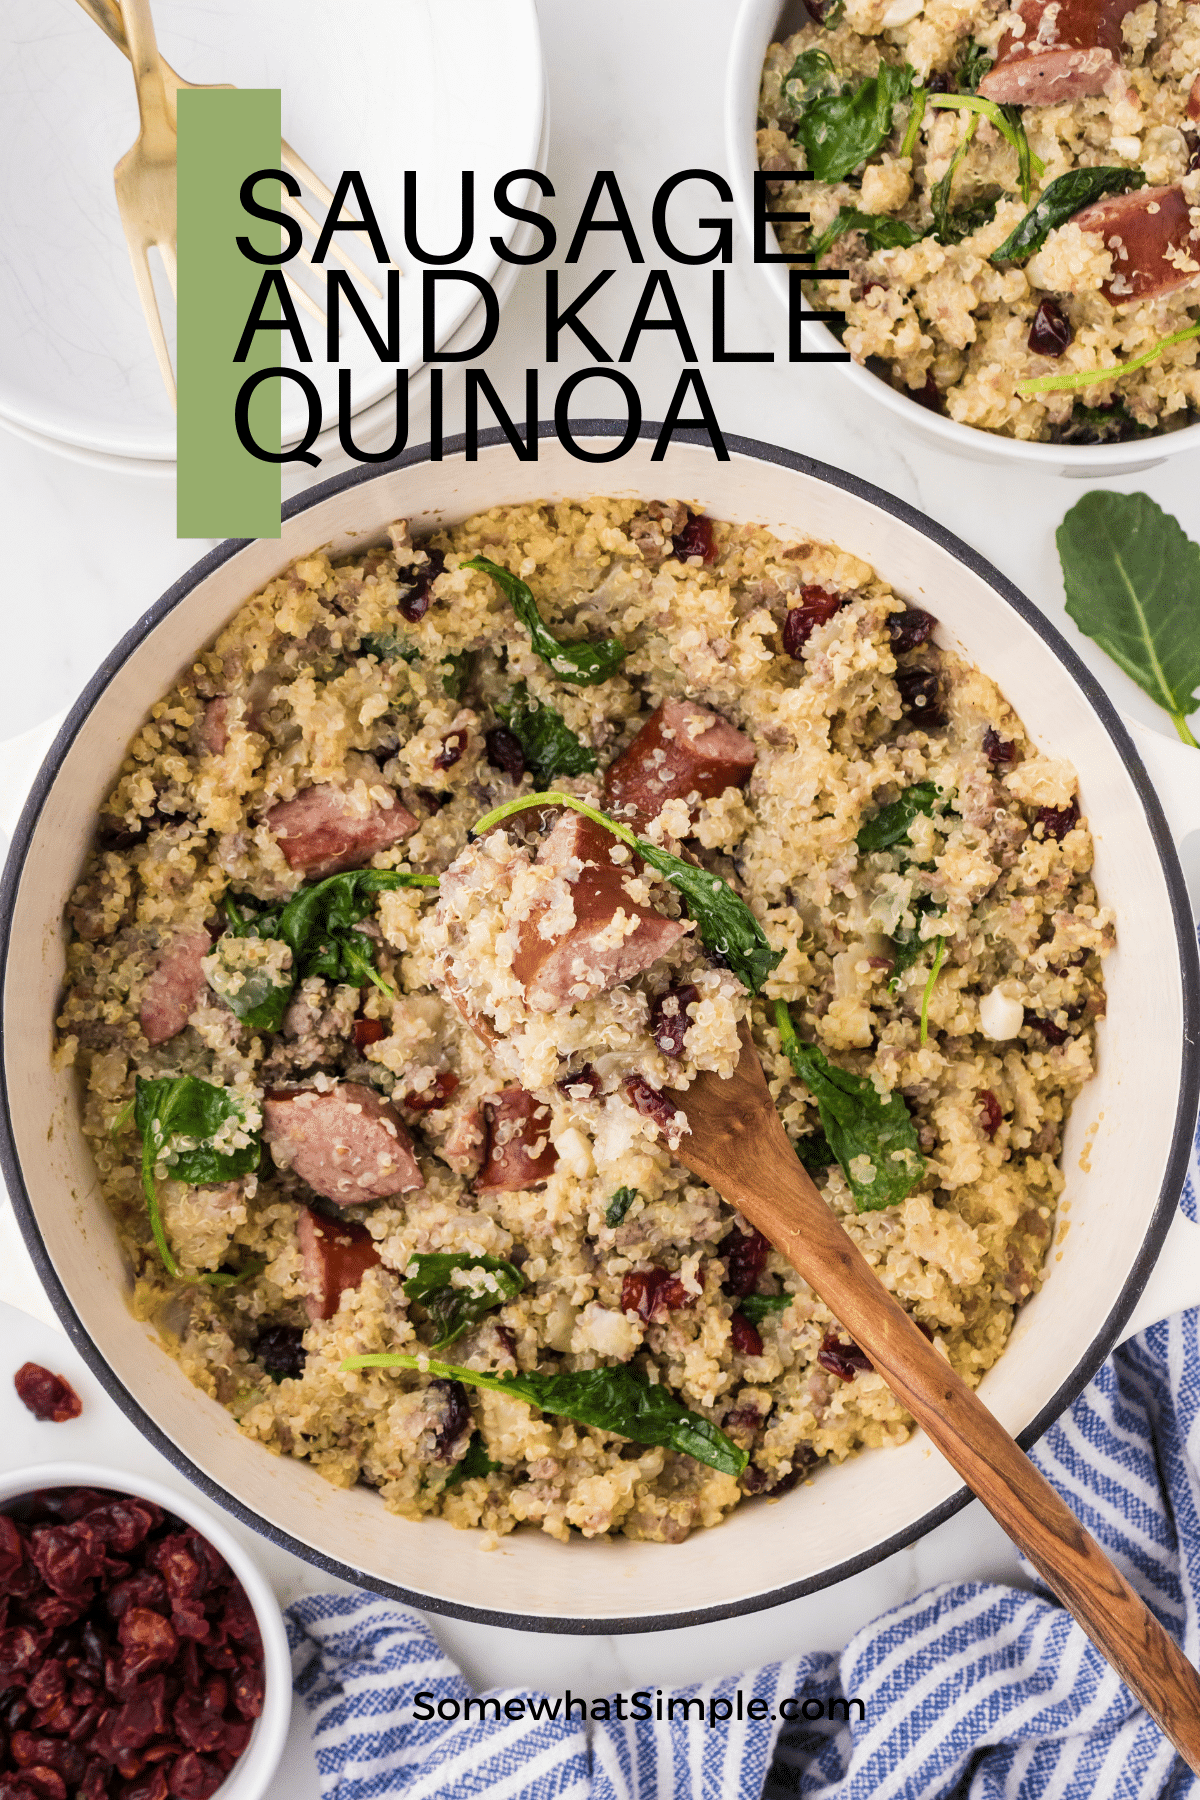 Sausage and Kale Quinoa is a one-pot meal that's hearty, wholesome, and ticks all the boxes for a satisfying dinner with minimal cleanup. Packed with protein, fiber, and vibrant greens, this recipe is sure to become a staple in your weeknight dinner rotation. via @somewhatsimple